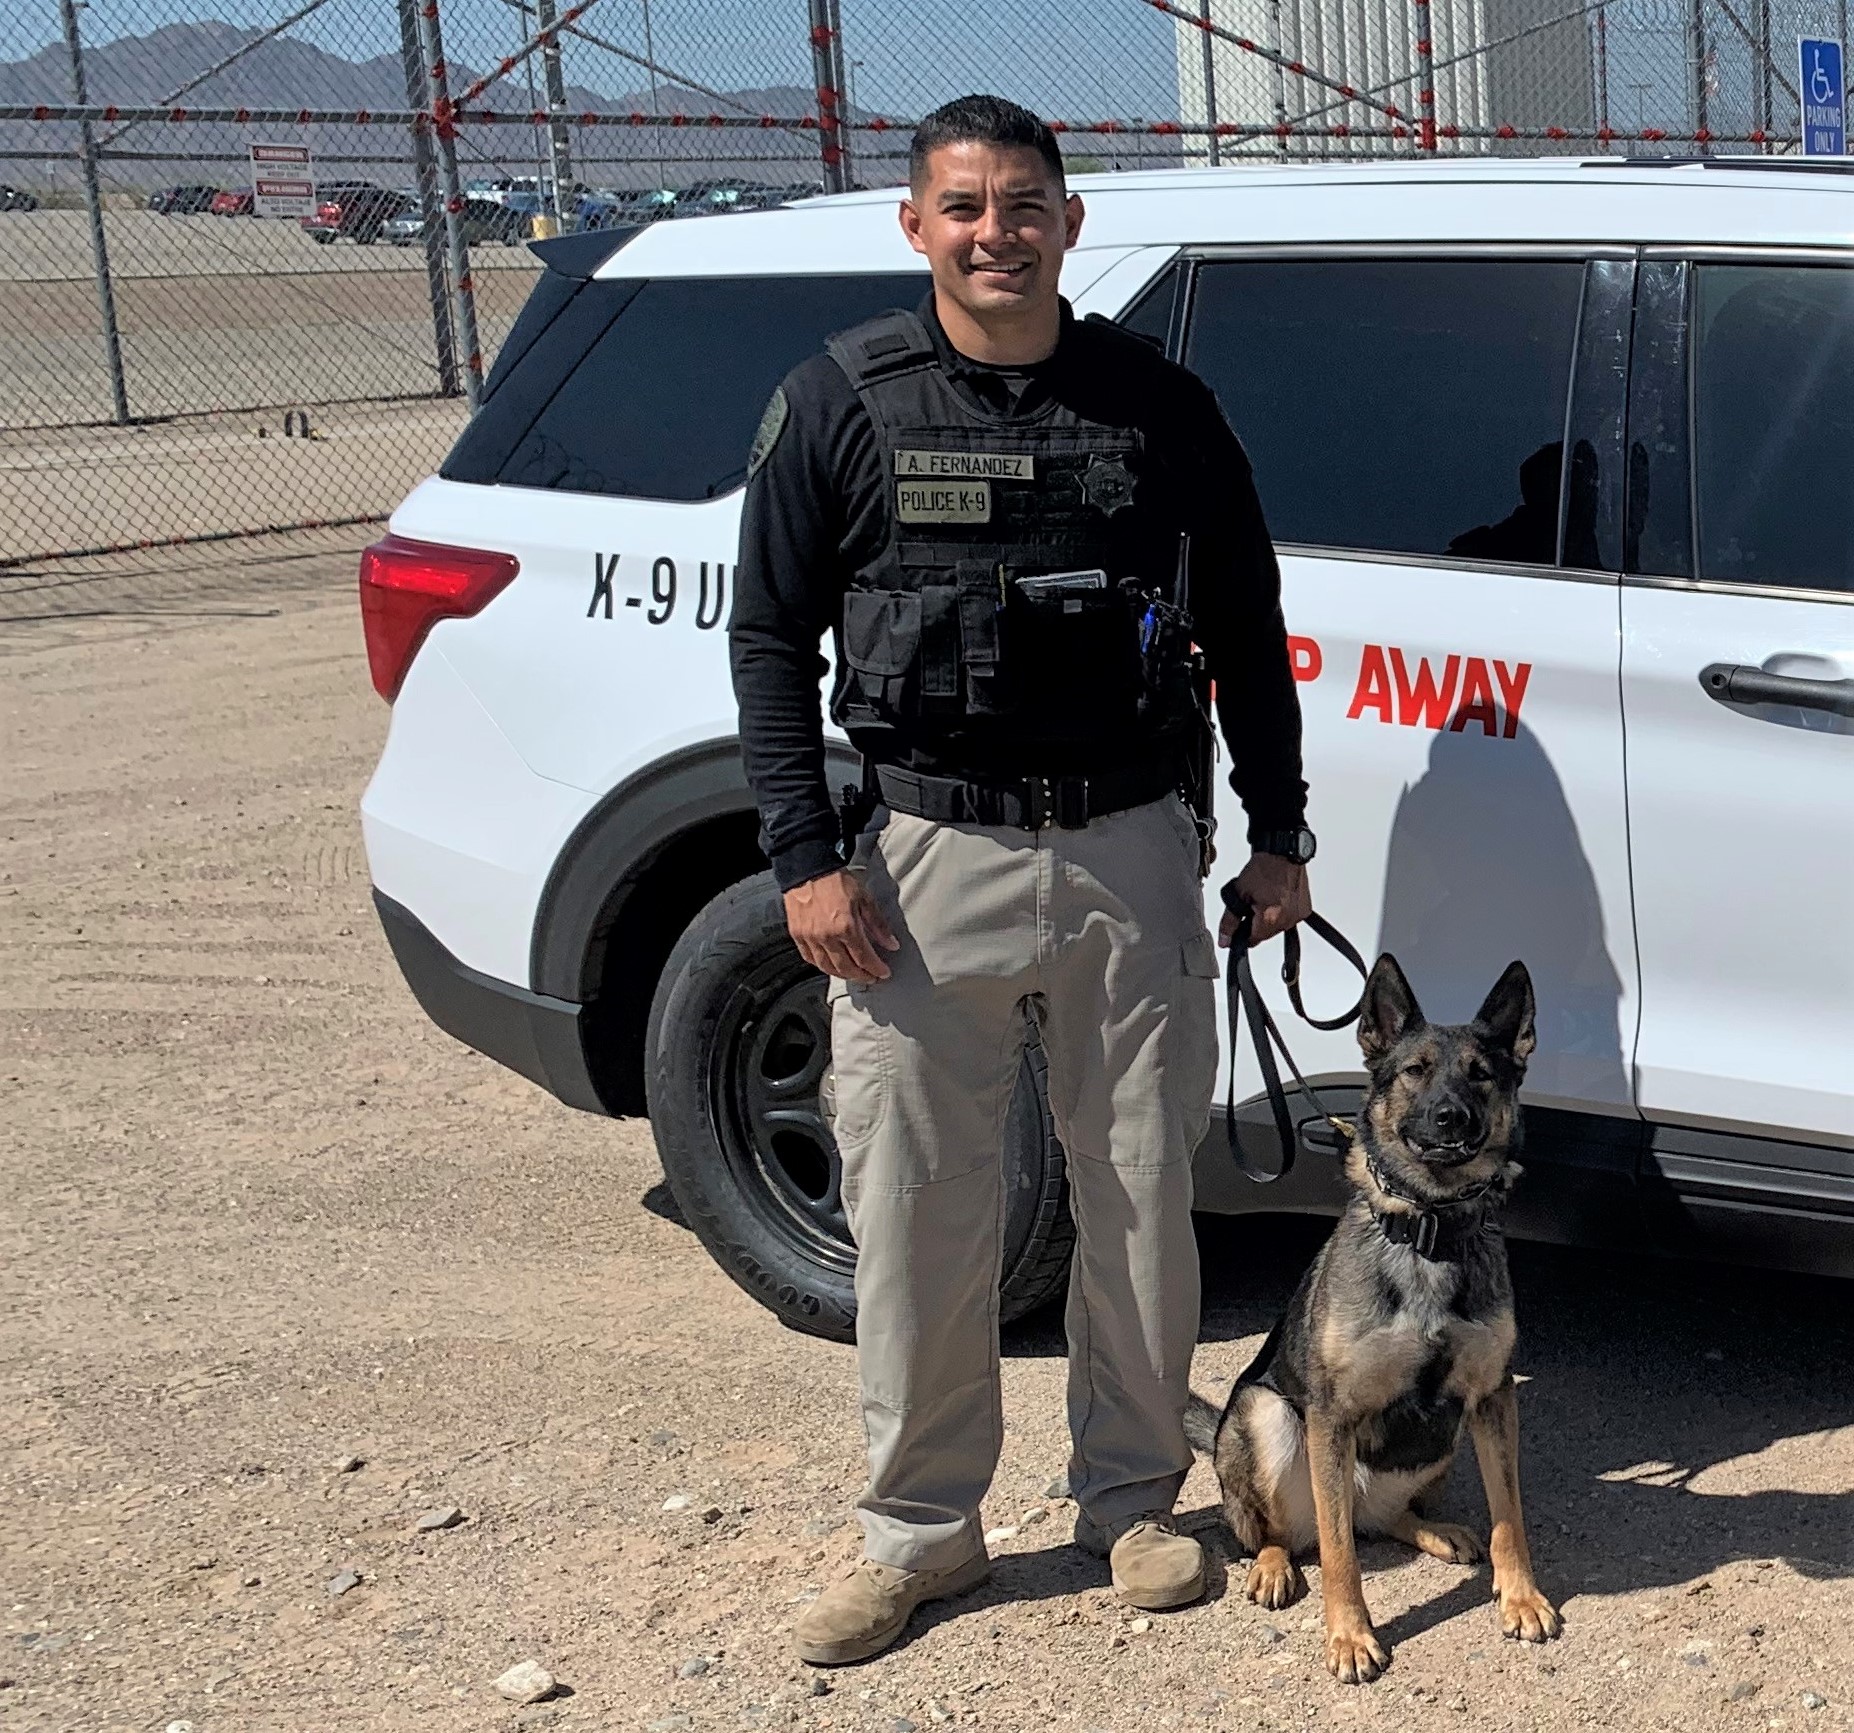 Correctional K-9 officer with dog.